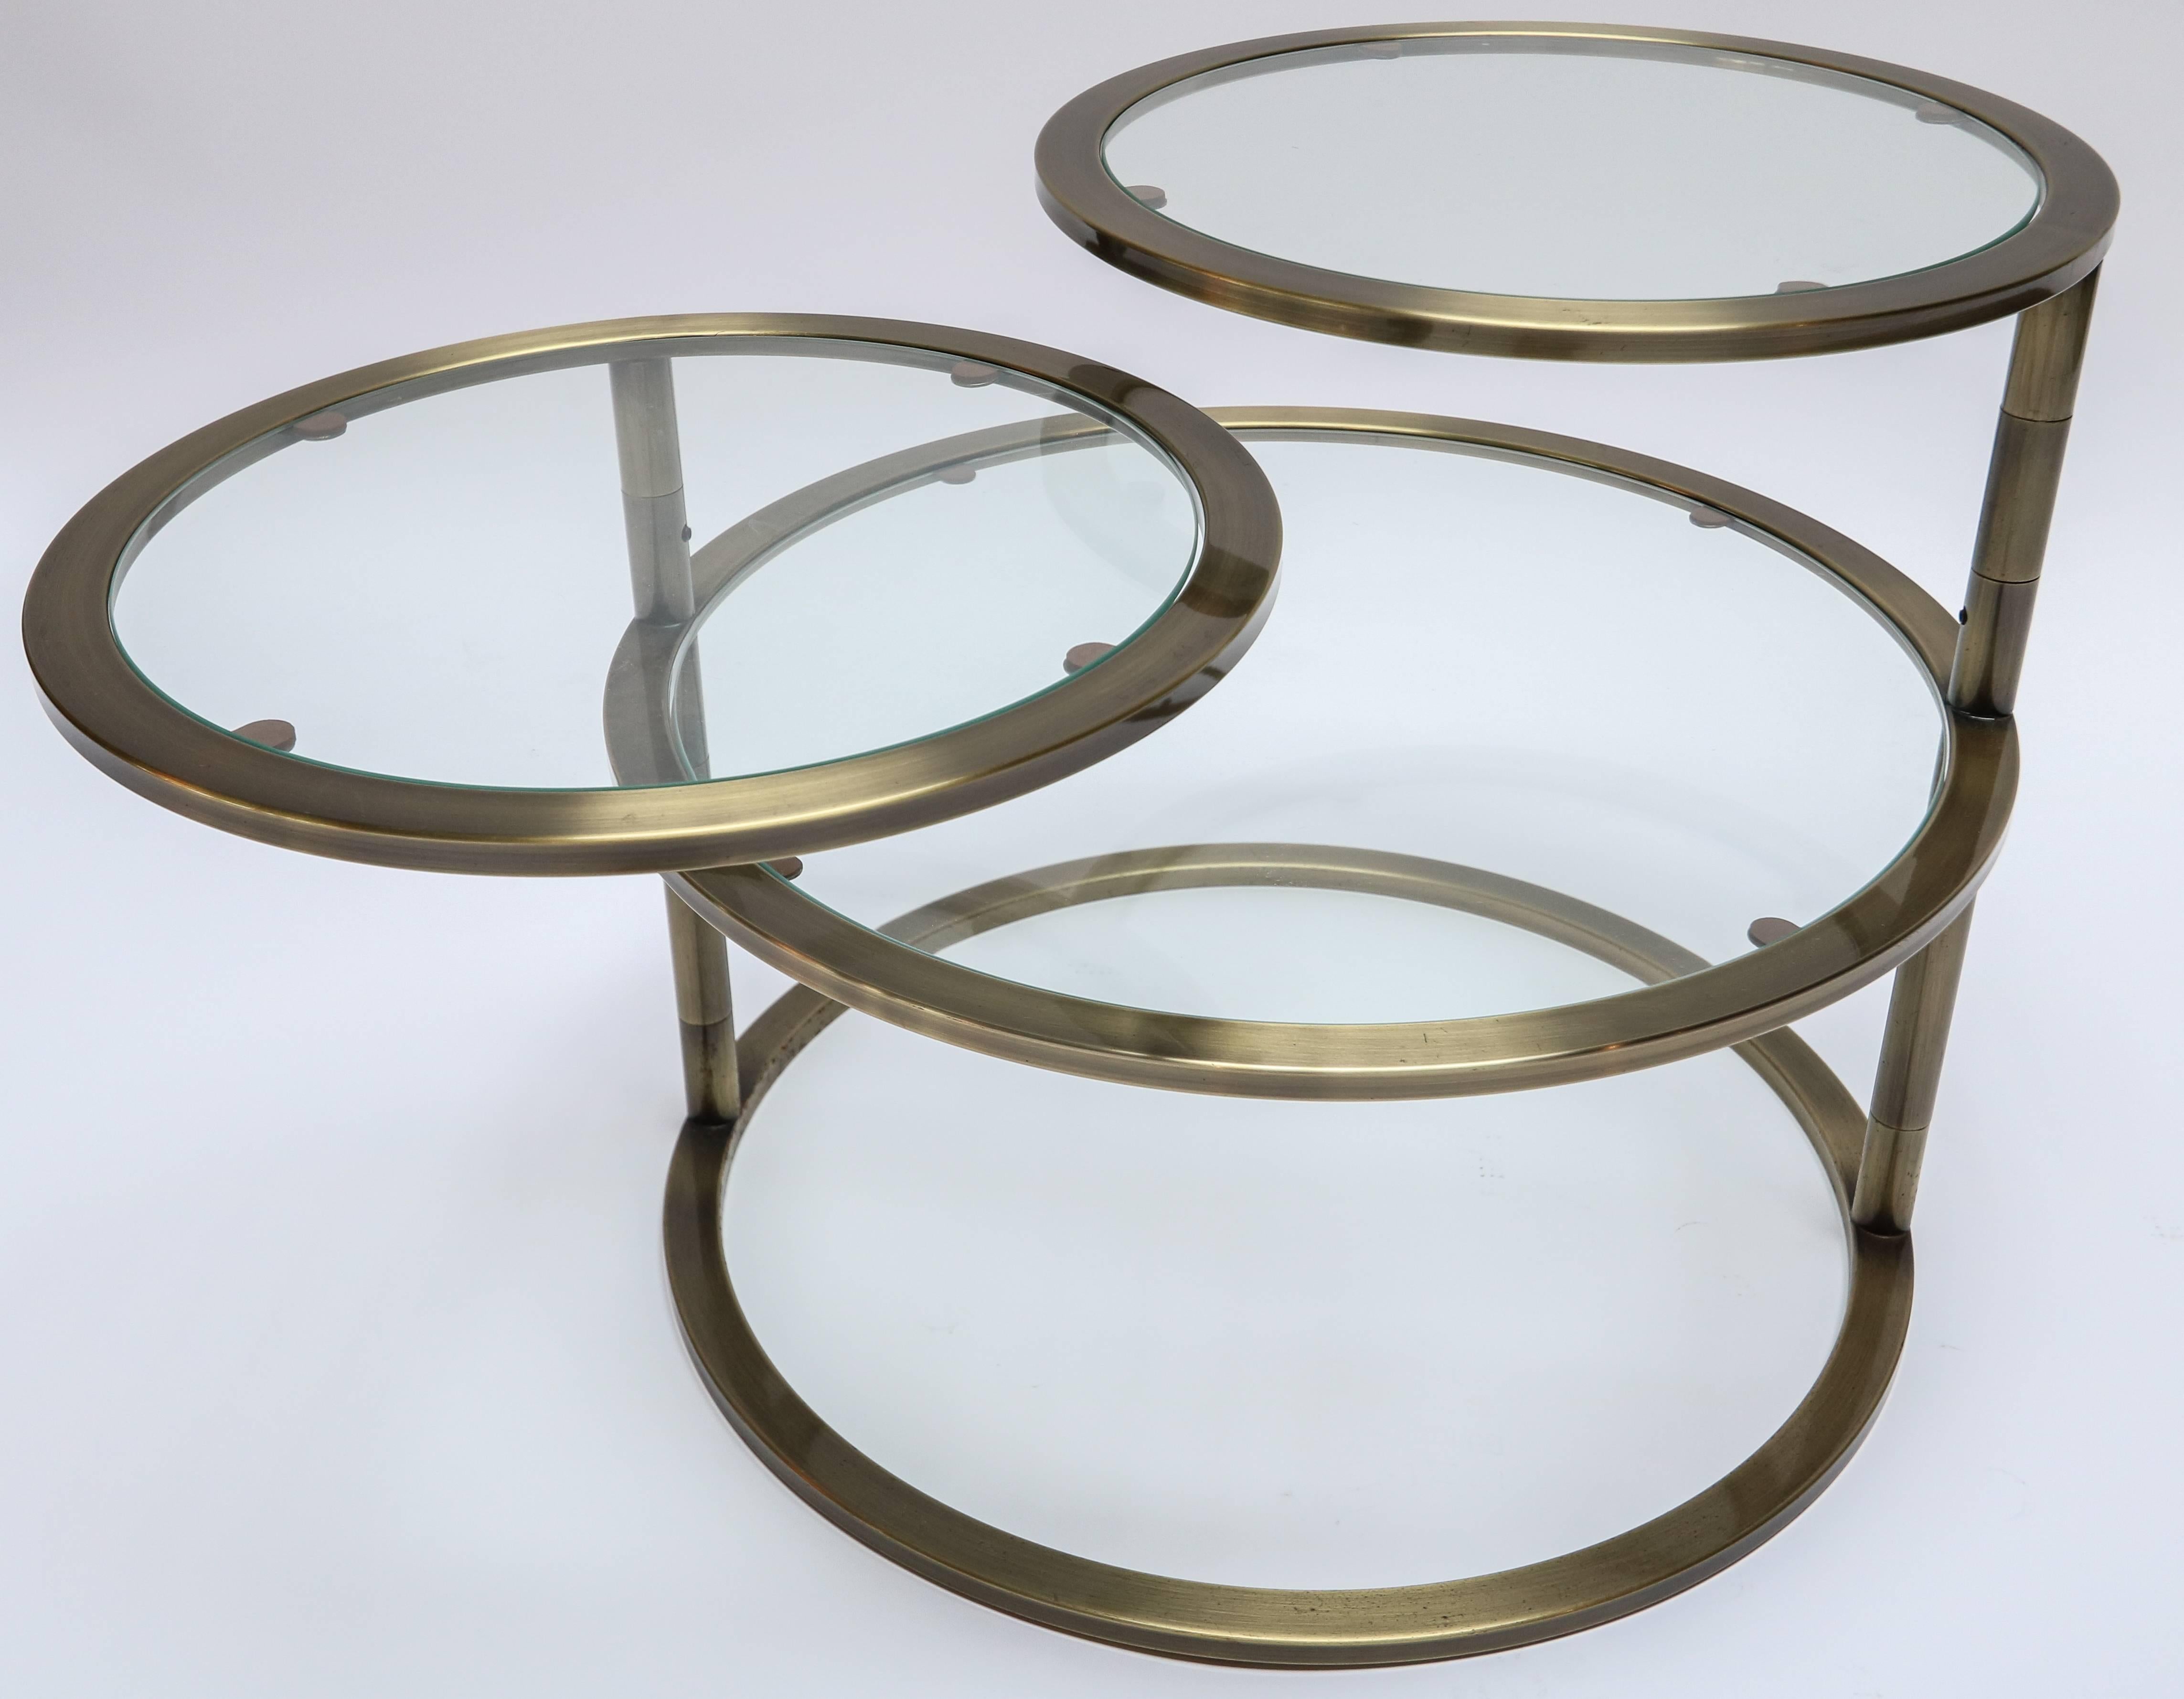 Three-Tiered Brass Coffee / Side Table with Adjustable Round Glass Shelves In Good Condition For Sale In Los Angeles, CA